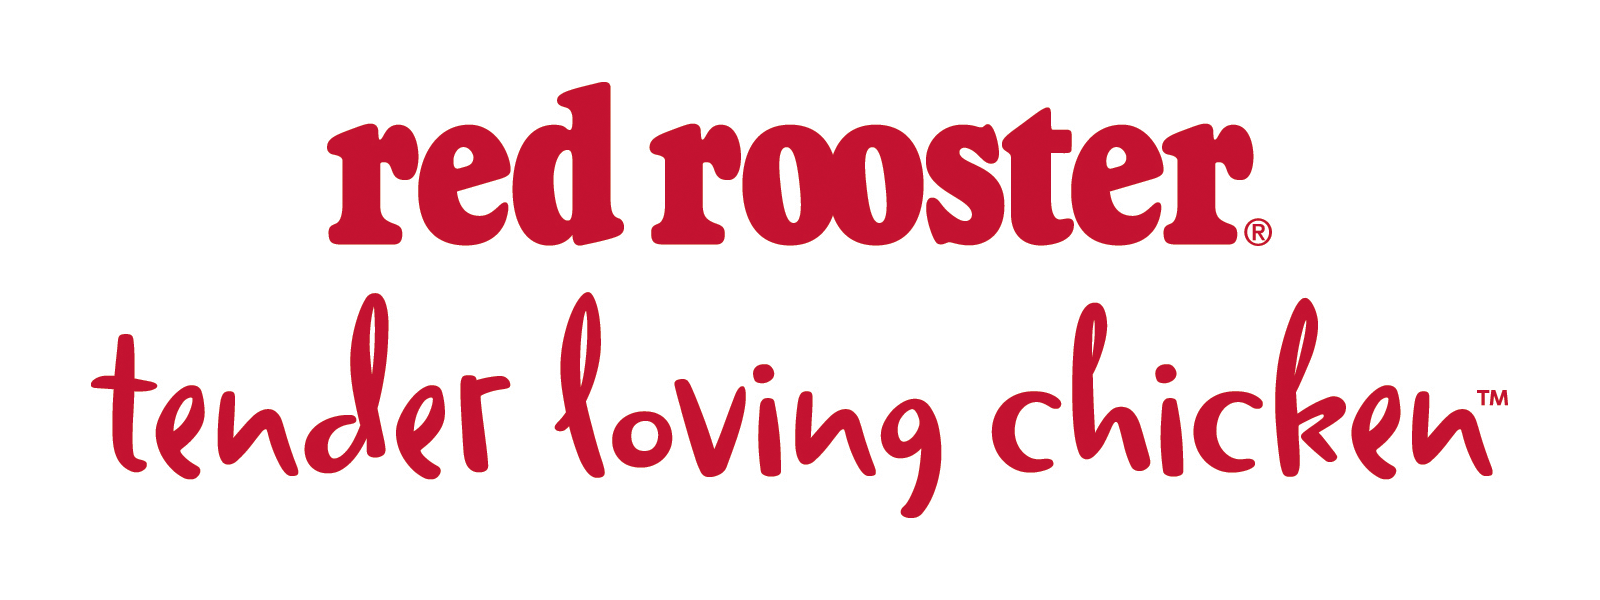 Red Rooster Logo - Red Rooster - Fonts In Use